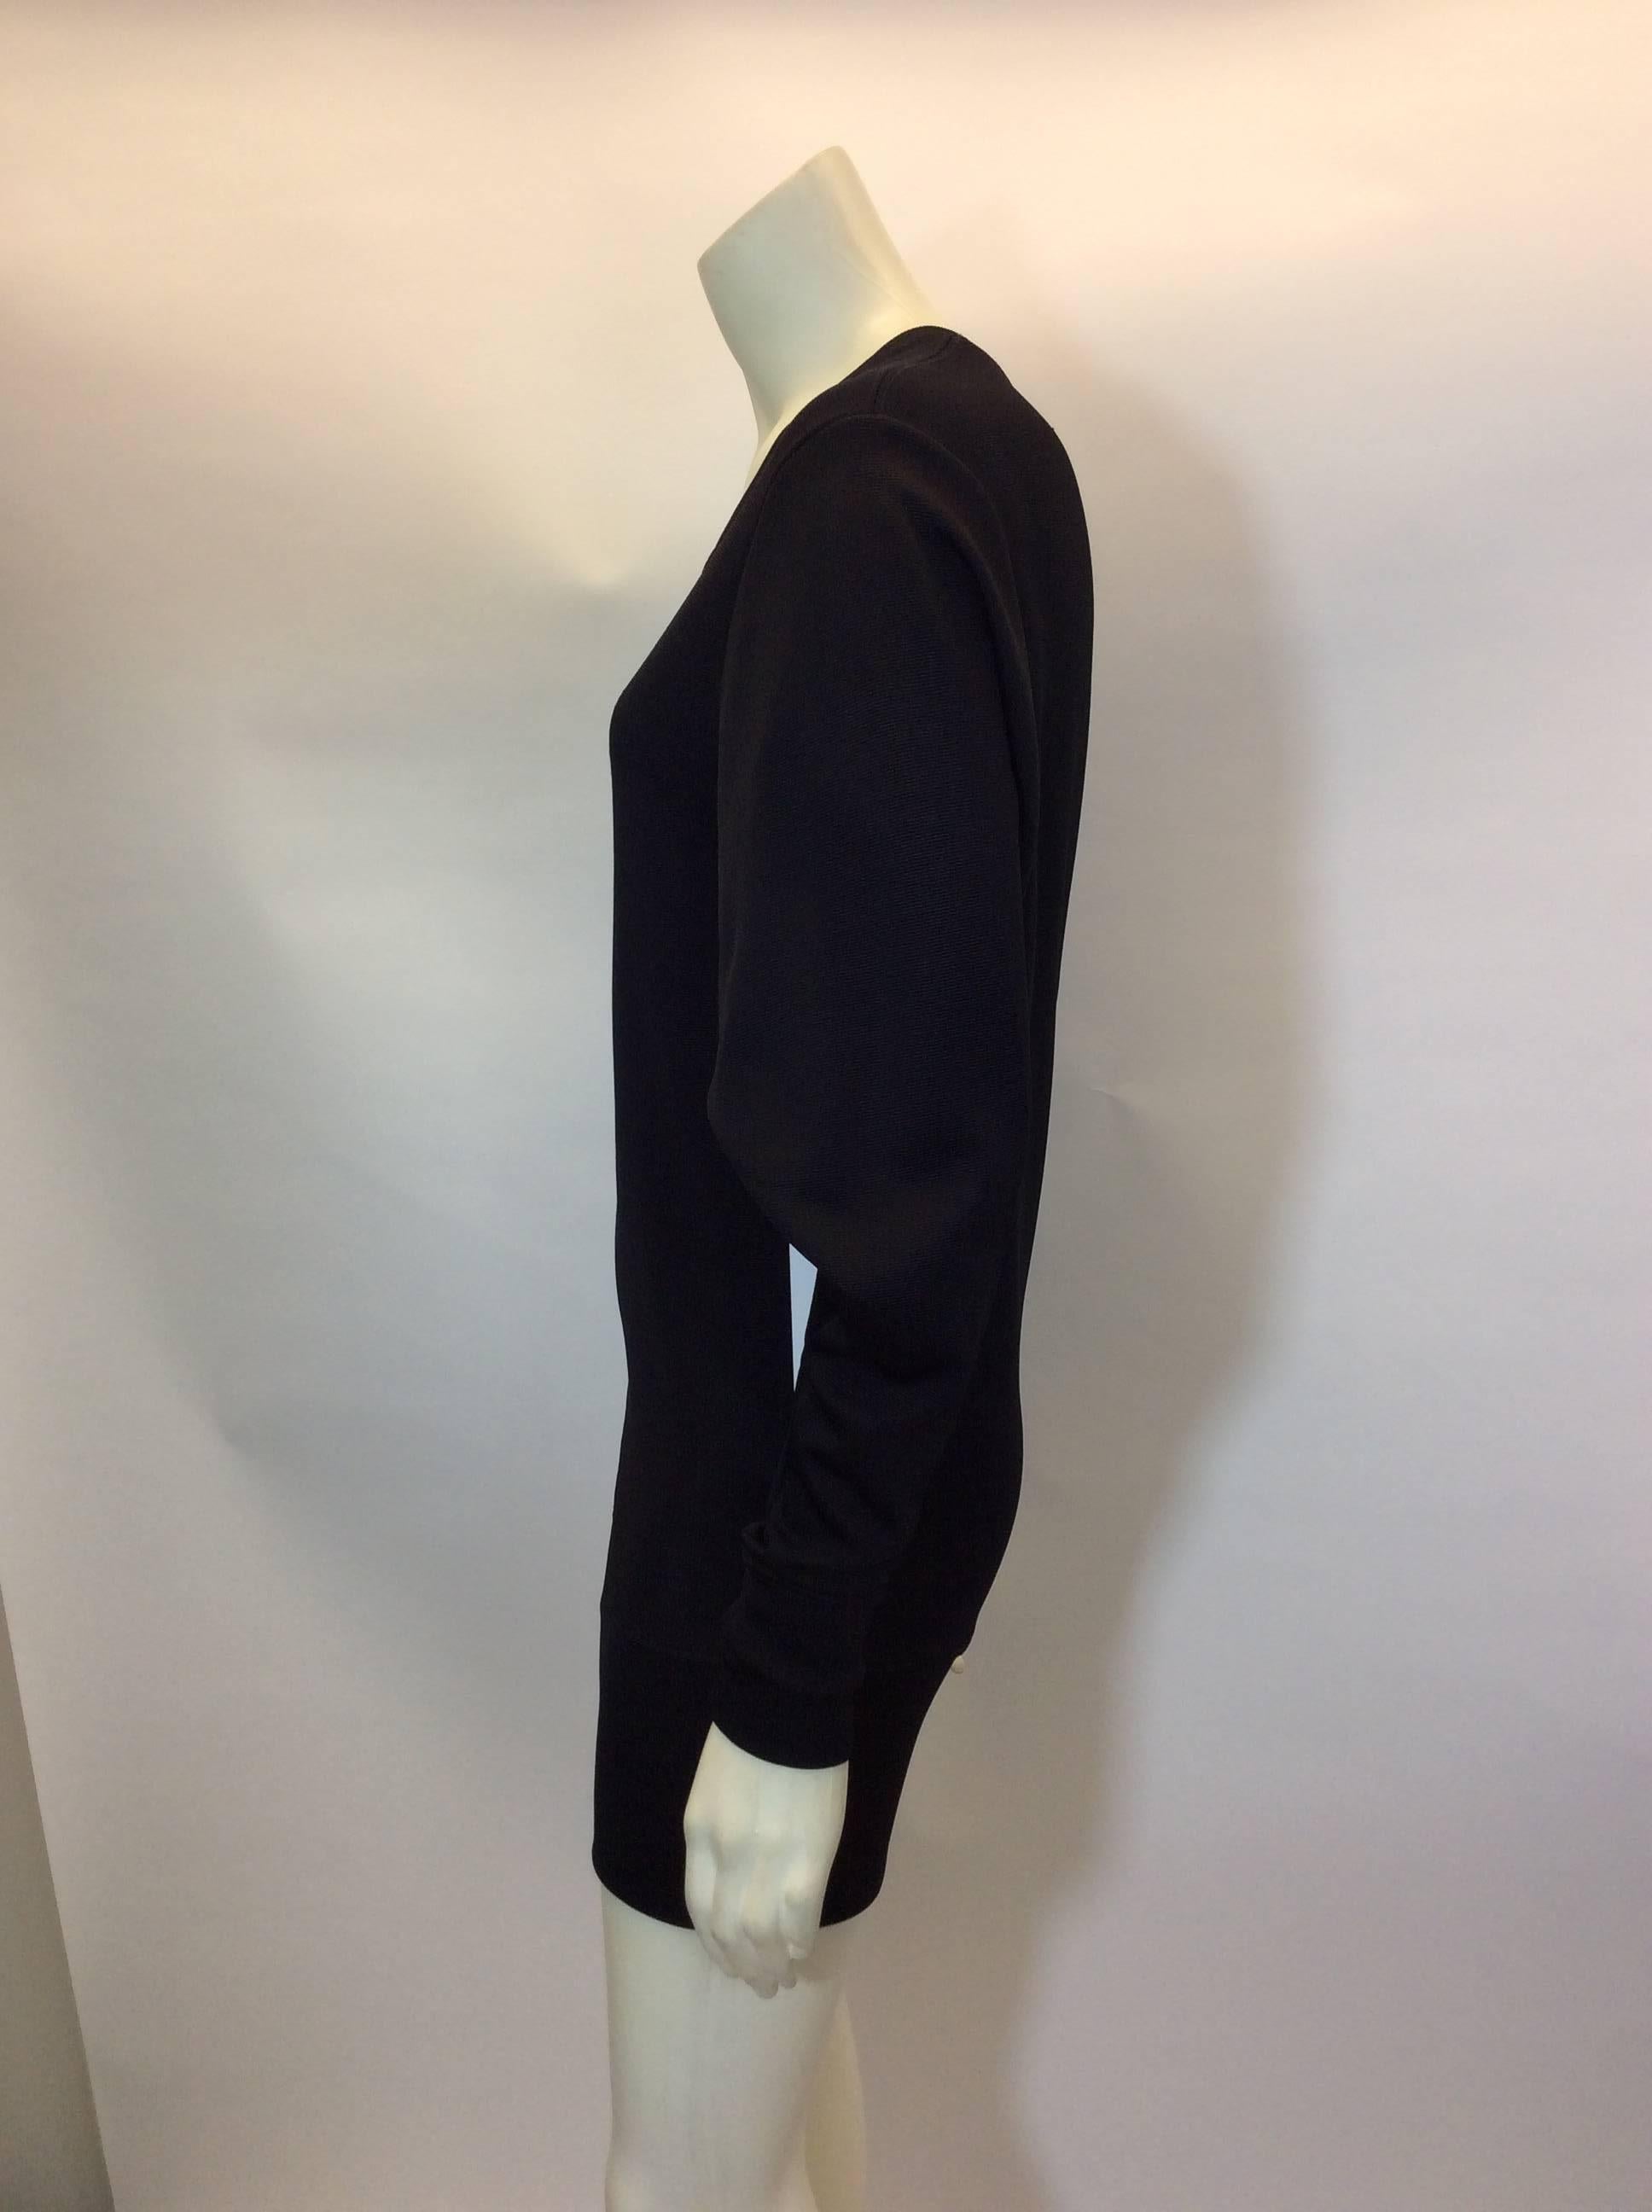 Helmut Lang Black Long Sleeve NWT Dress
Size X-Small
Slouchy sleeve style
$225
87% viscose, 9& poly, 4% elastane
All black with banded bottom hem
Made in the USA